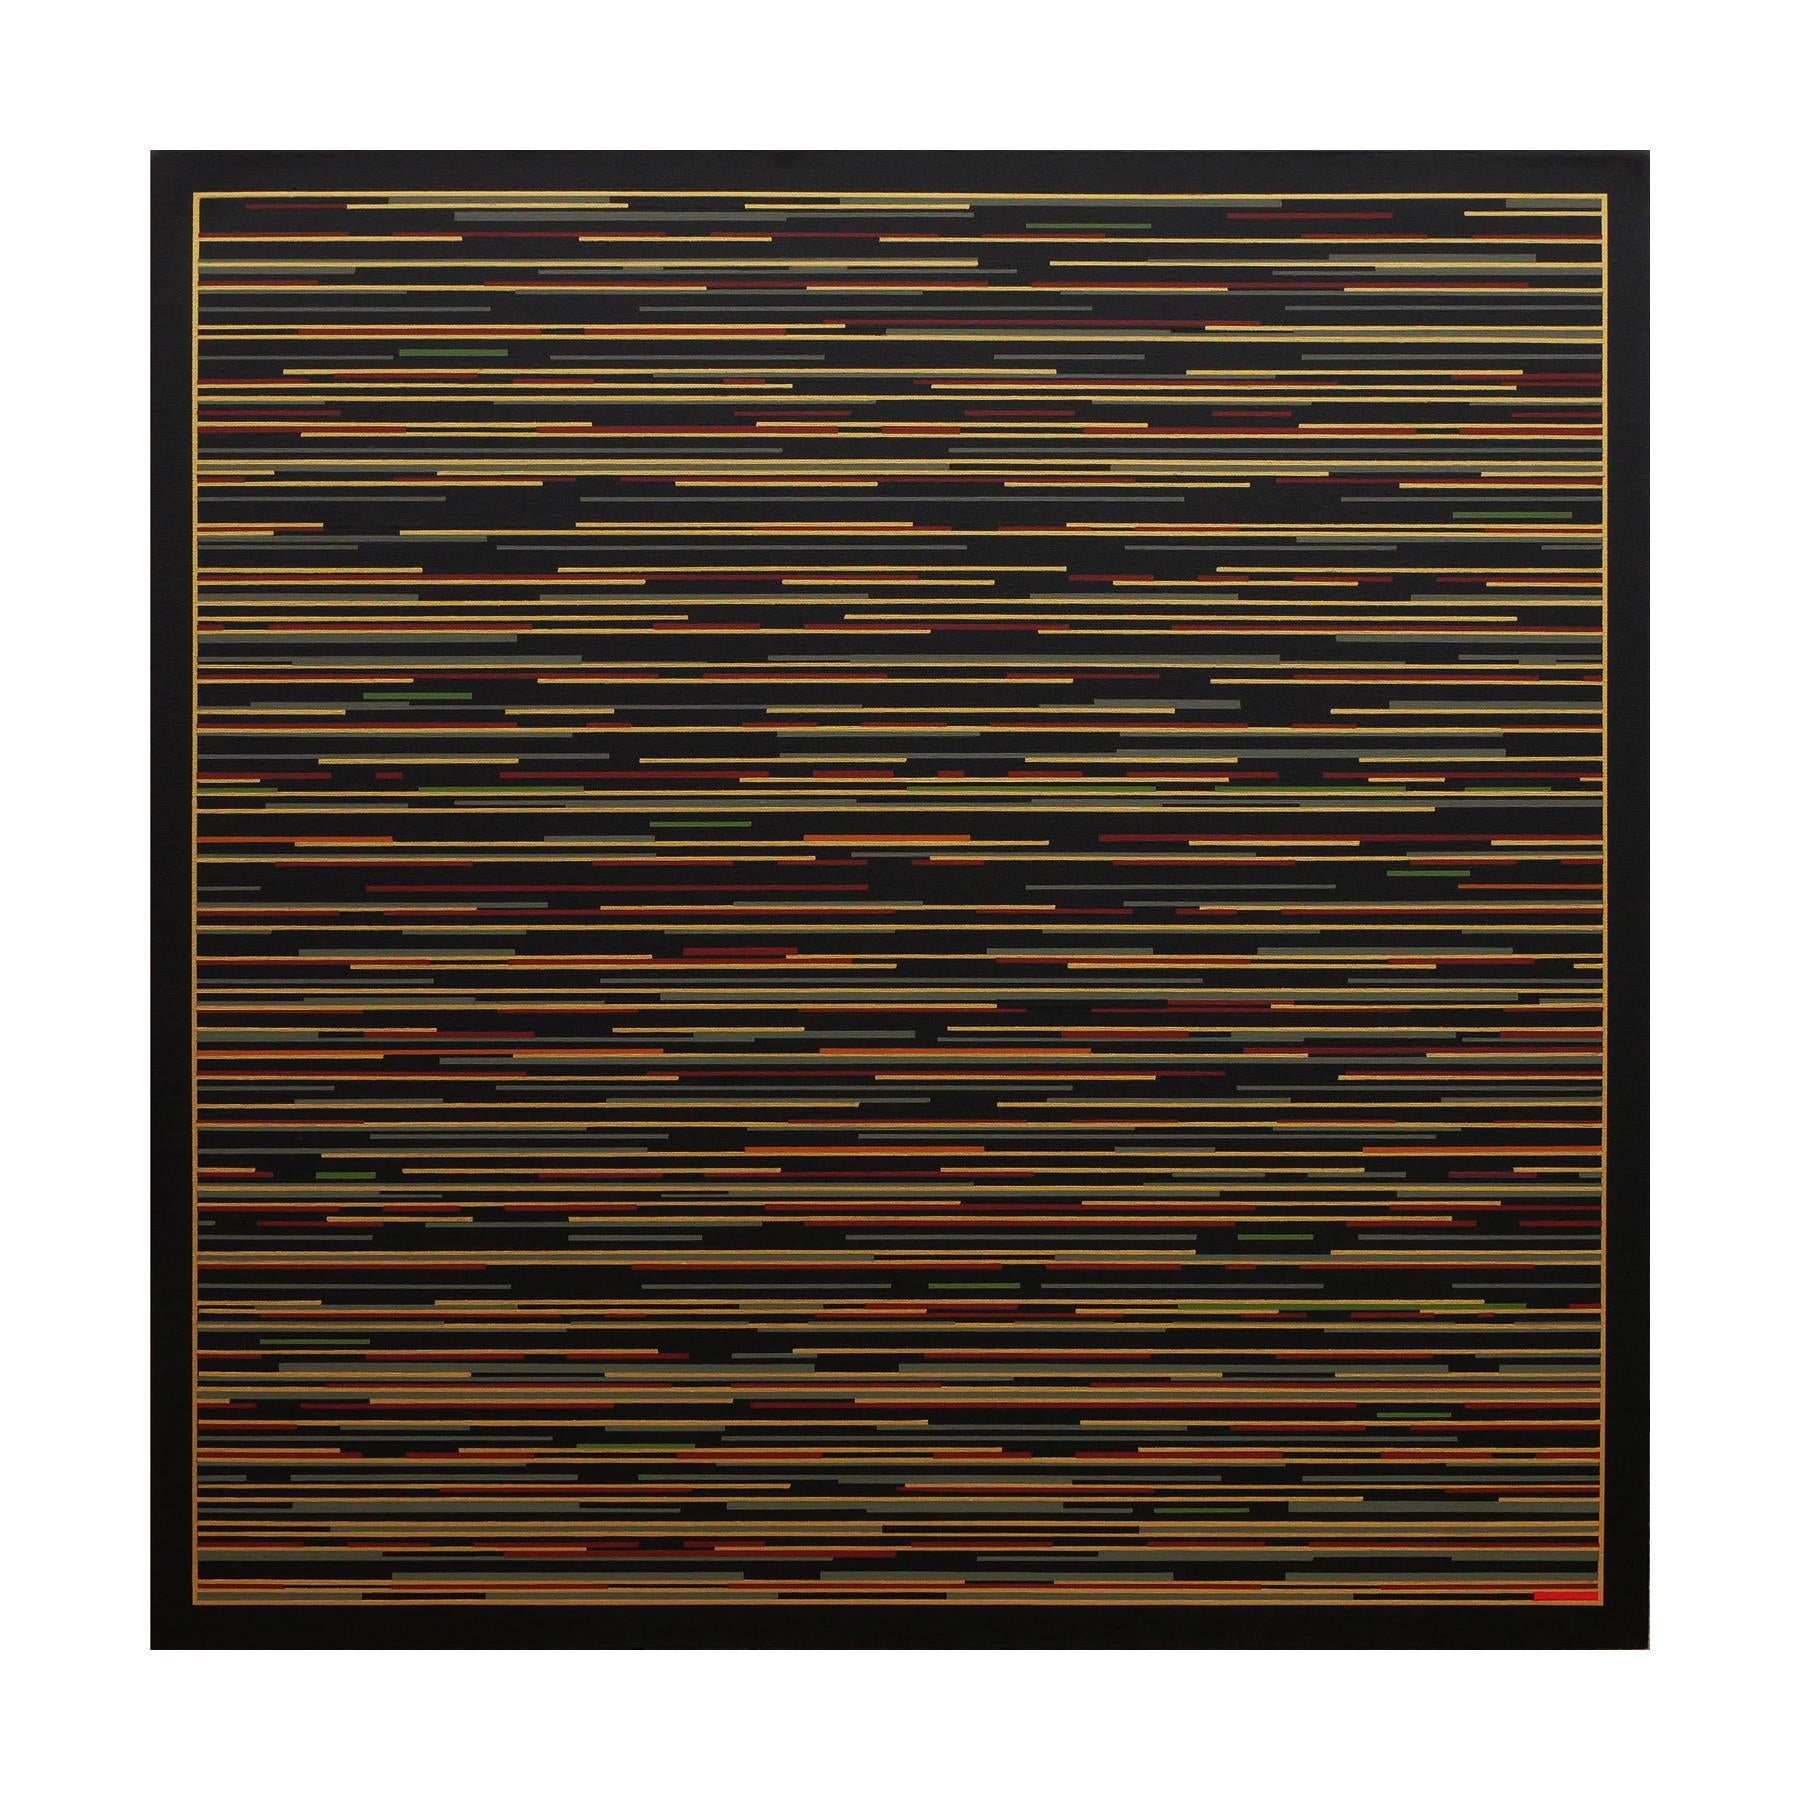 Contemporary abstract geometric painting by artist Mark Byckowski. The work is featured in a series of paintings. The work features horizontal lines with a variety of vivid colors of red, blue, green, and yellow, painted on a black background. Each